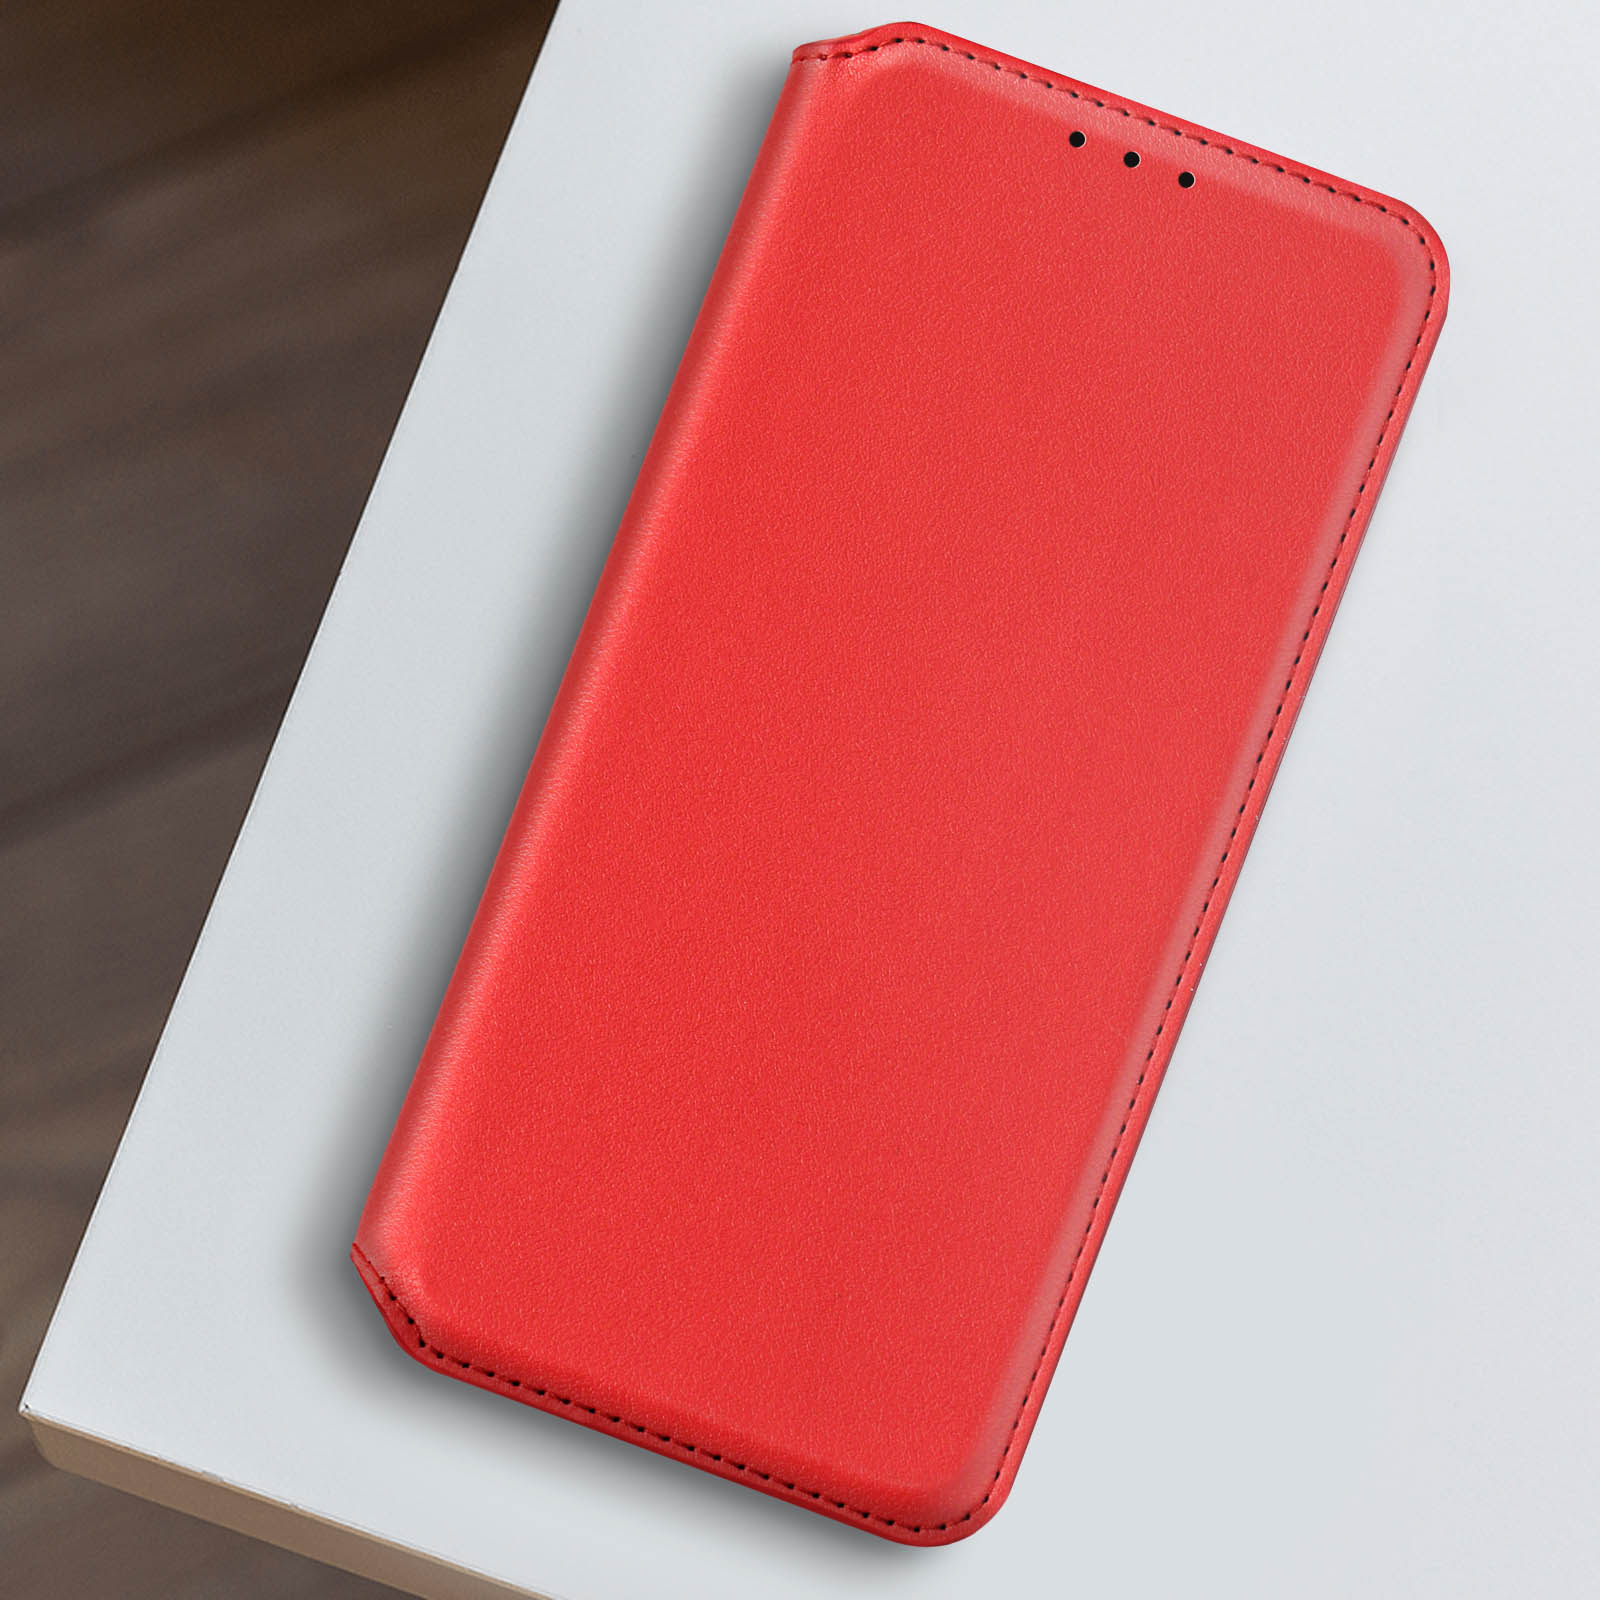 AVIZAR Classic Edition, Xiaomi, Bookcover, 9S, Magnetklappe Backcover Redmi Note Series, mit Rot